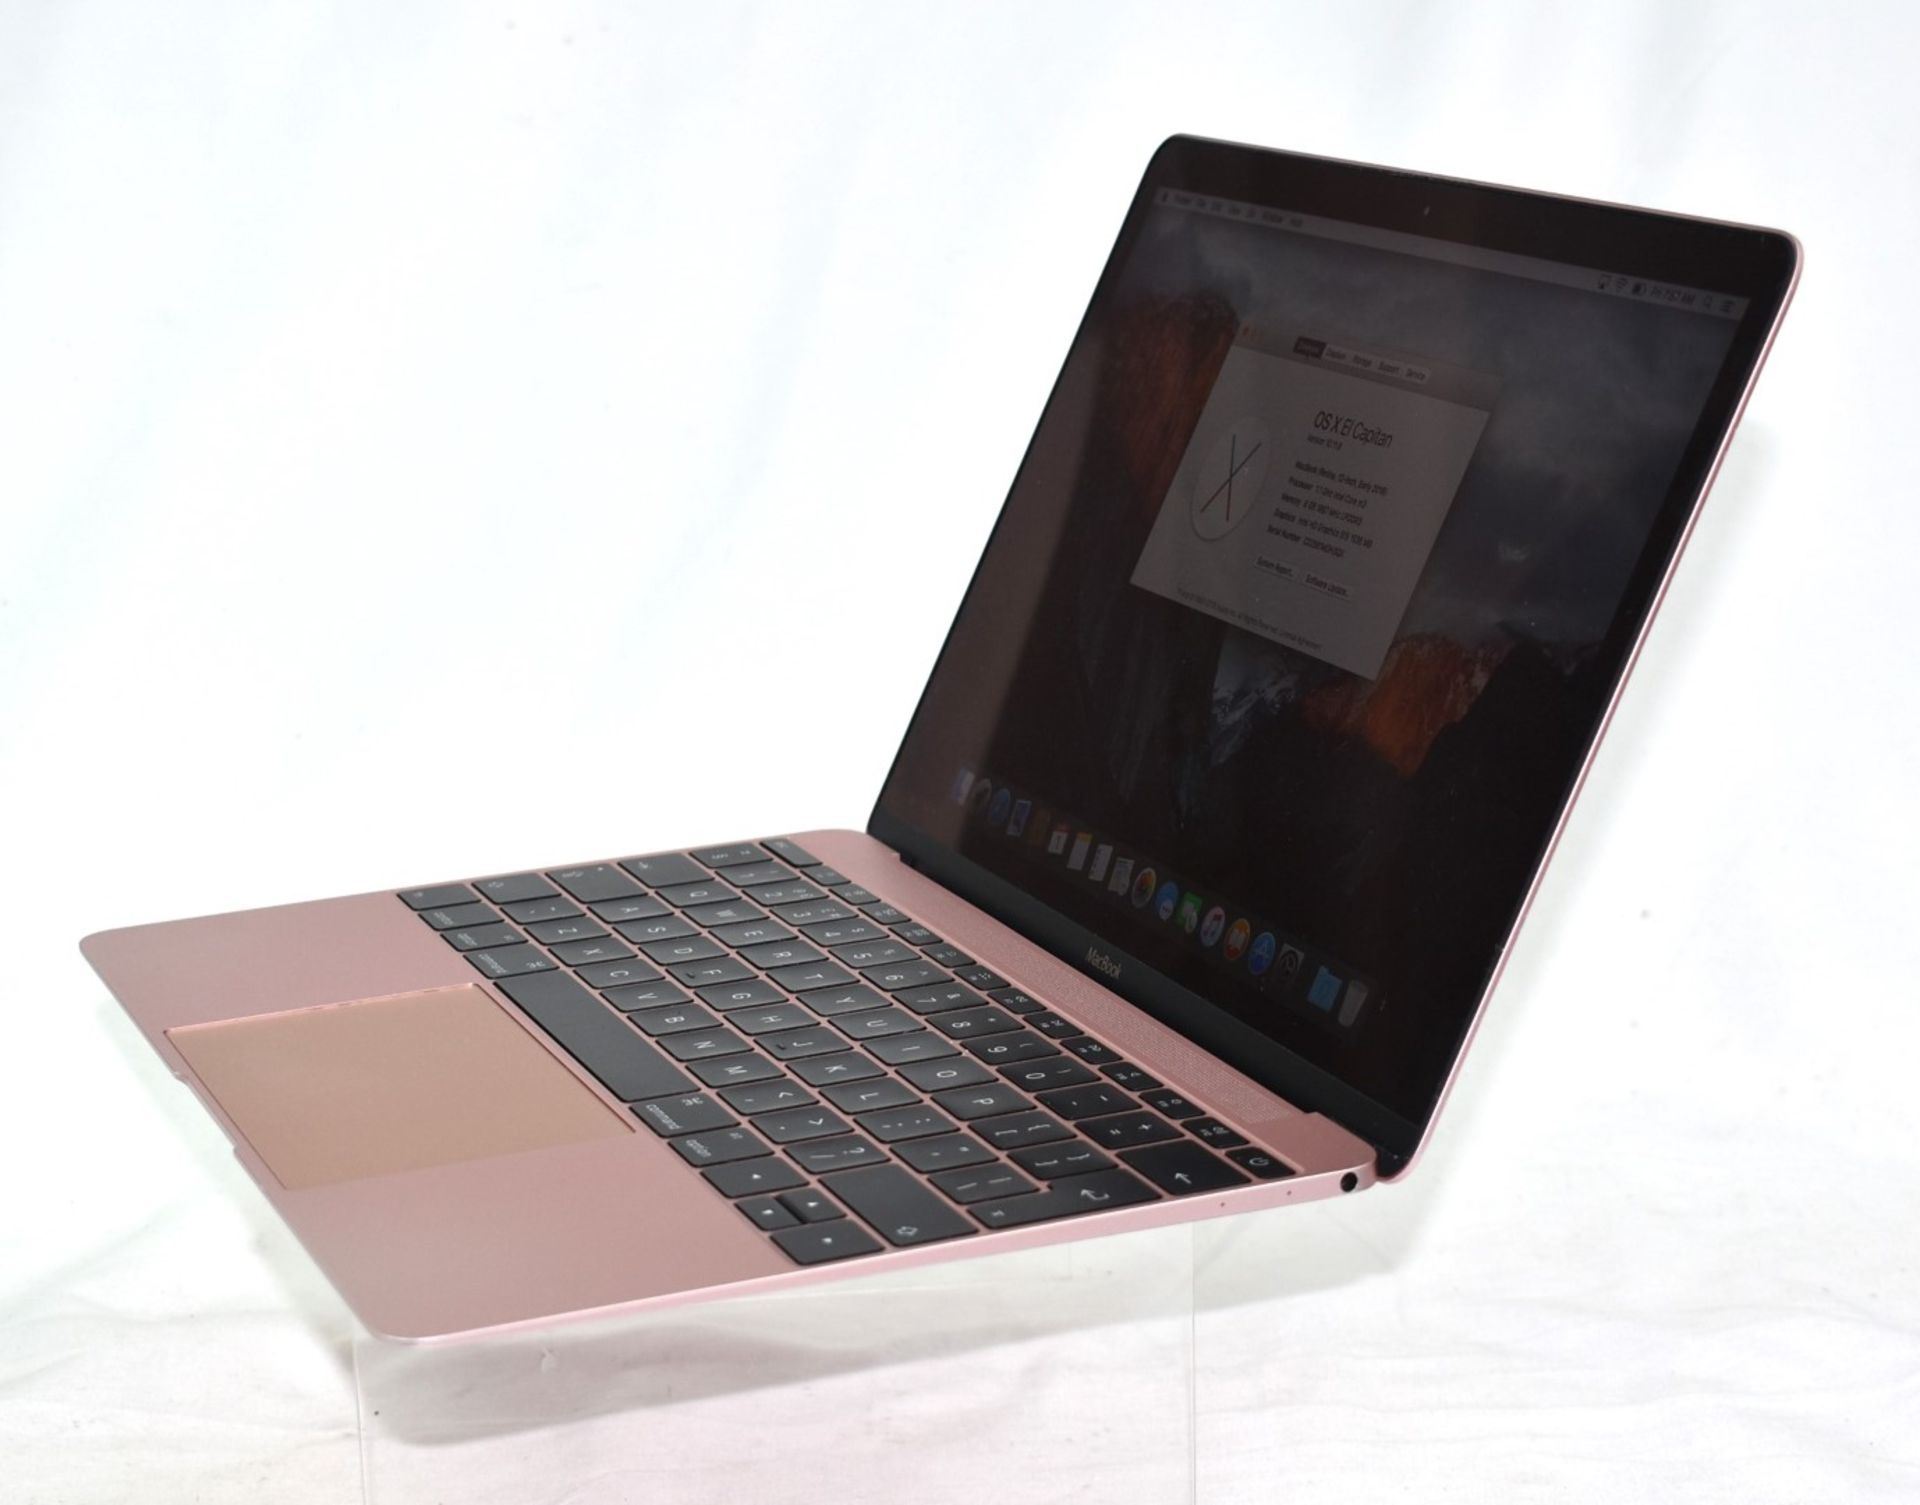 1 x 2016 12 Inch Apple MacBook Featuring an Intel M3 Processor, 8GB Ram and a 250GB SSD - Image 5 of 19